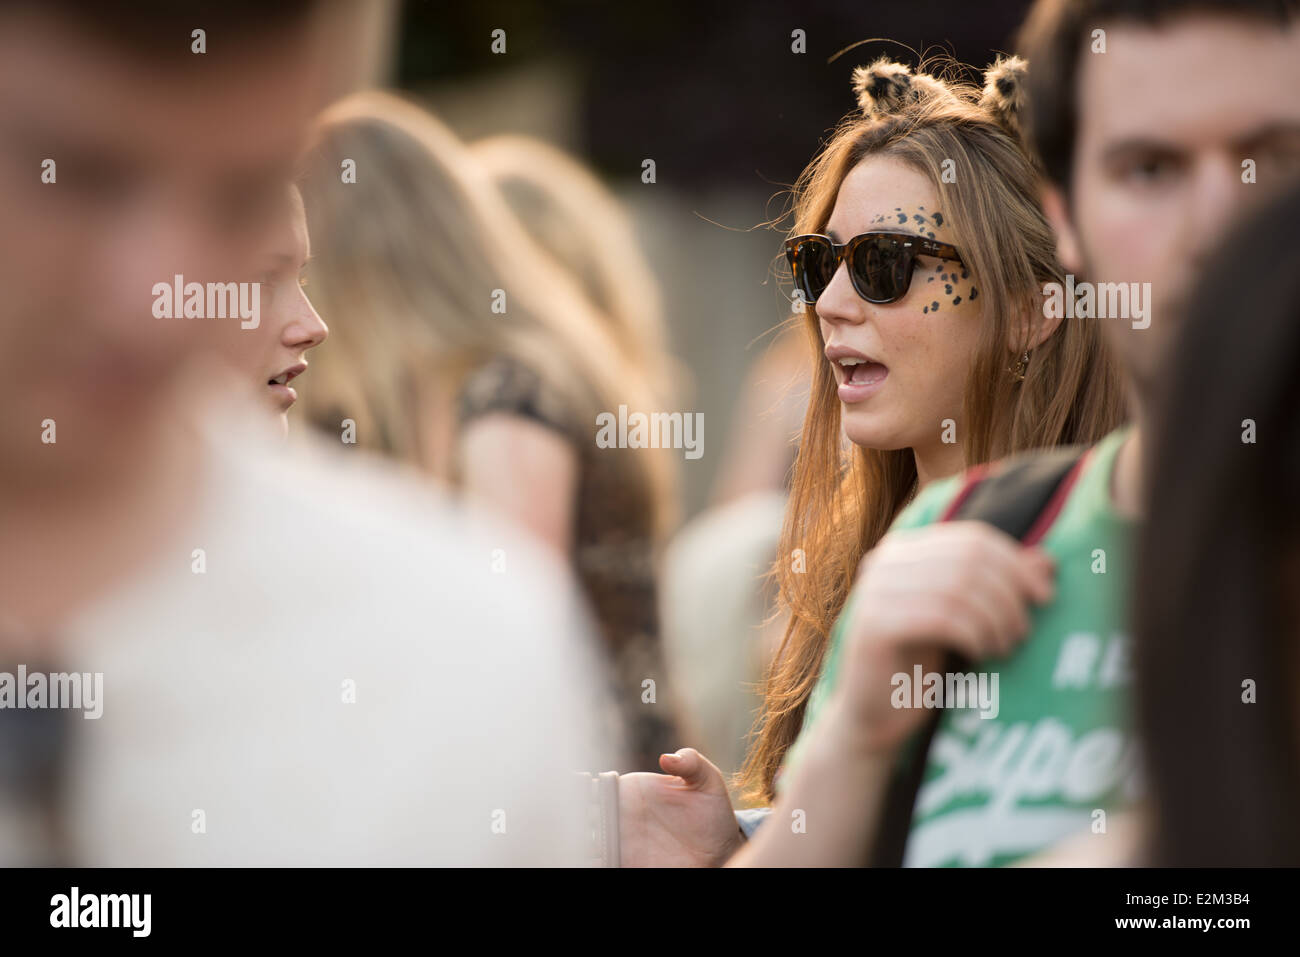 London Zoo June 2014 evening event. Woman wearing animal face paint. Stock Photo